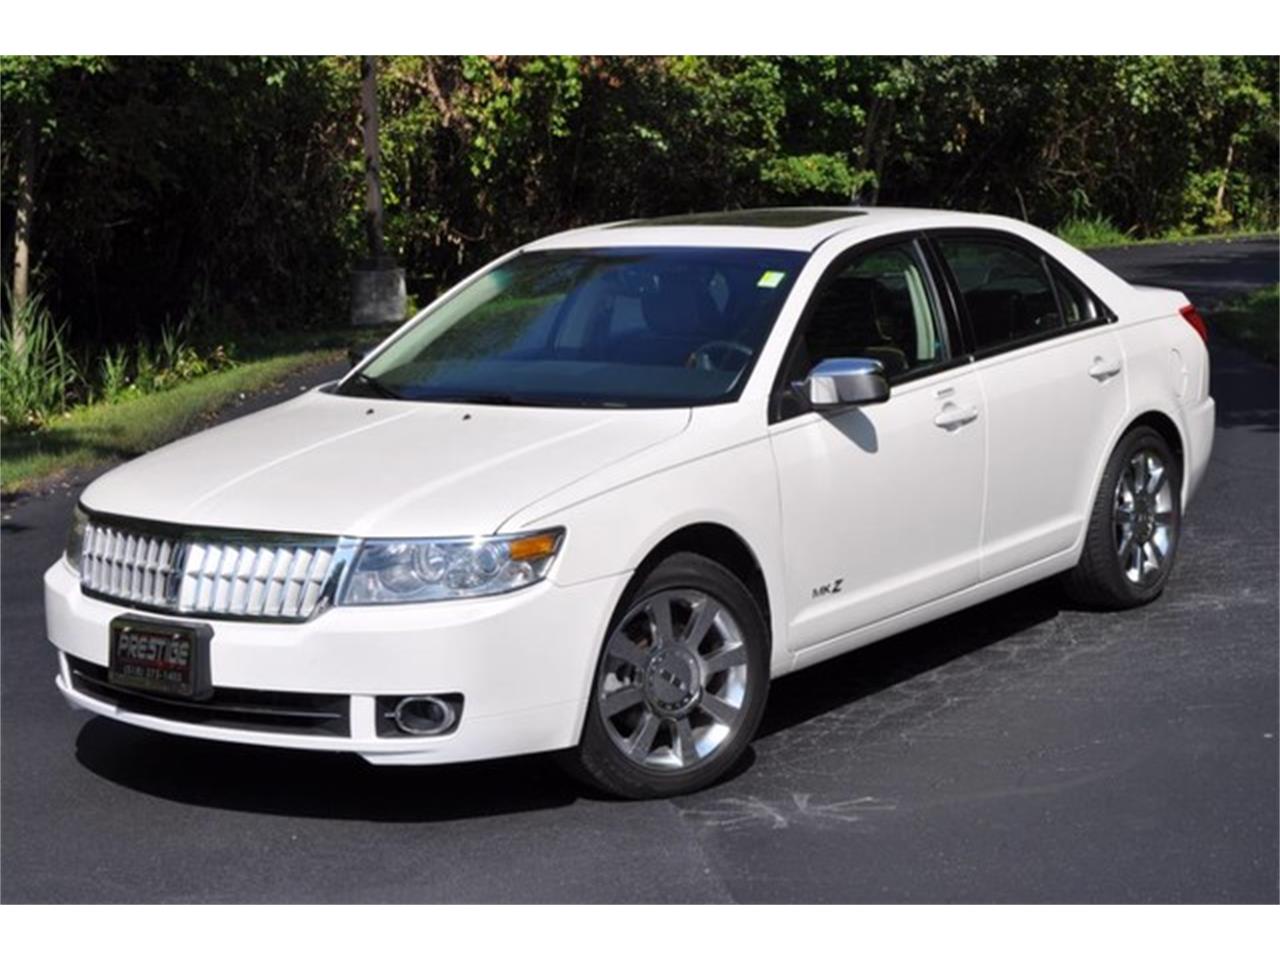 2009 Lincoln MKZ for Sale | ClassicCars.com | CC-1015544